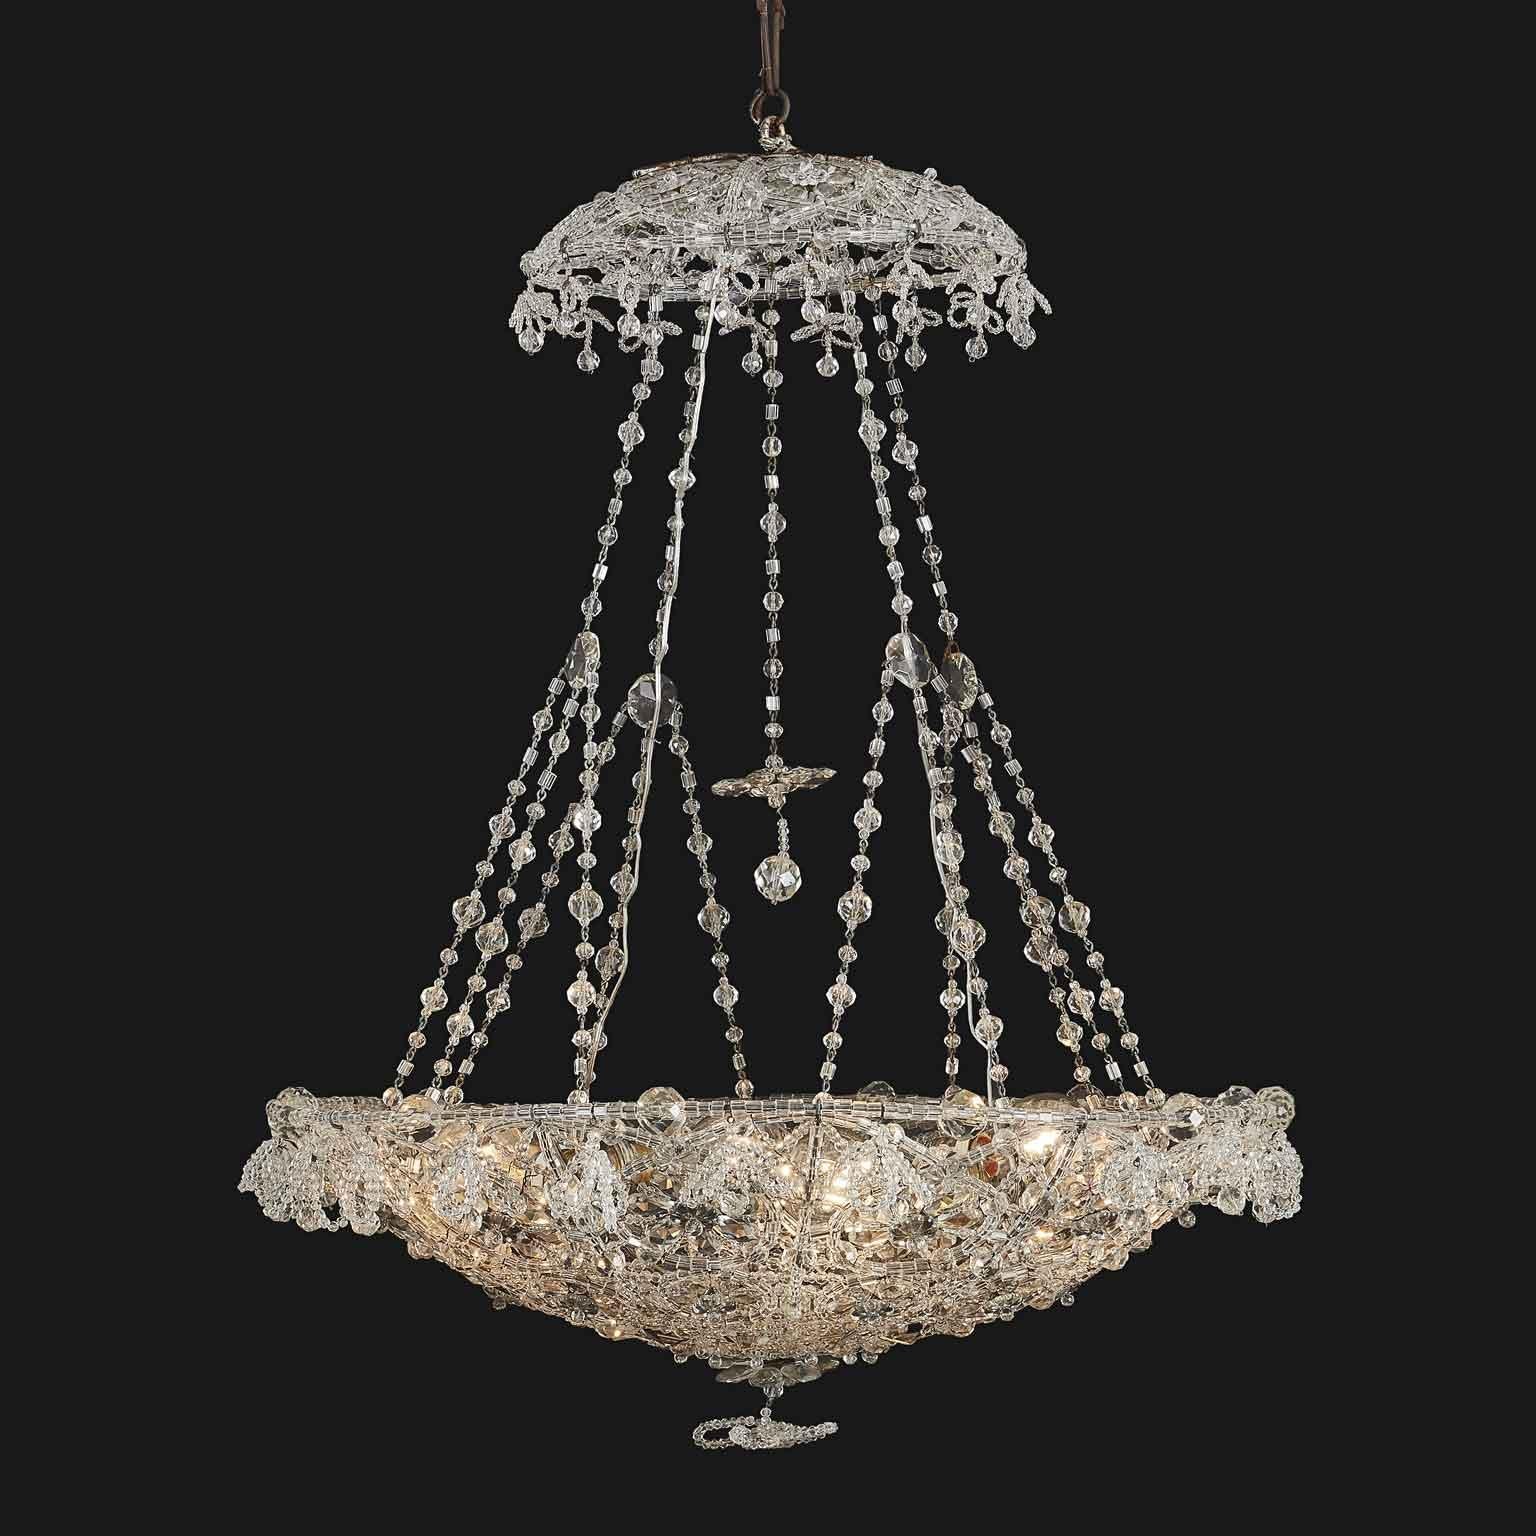 A stunning made in Italy chandelier with six lights and over thousands of crystal beads, strung and woven by hand to create flowers and floral patterns.

This unique and exclusive beaded crystal Italian chandelier is in good condition, it has been